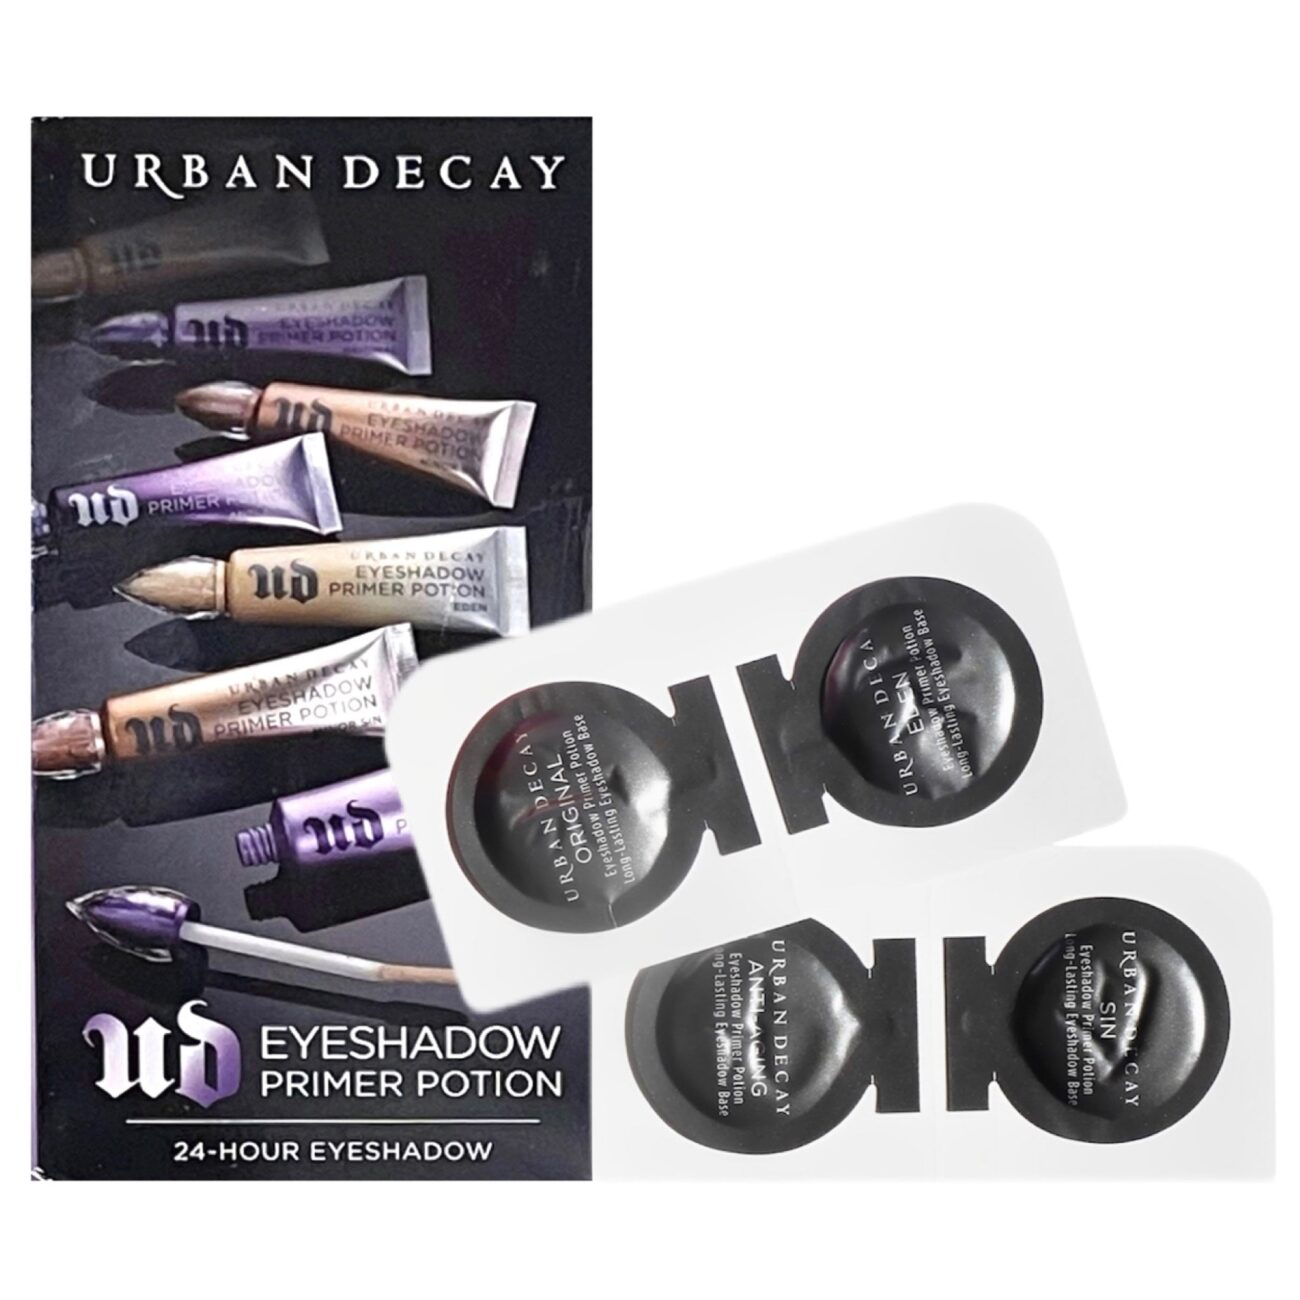 Eyeshadow Primer Potion Collection Sample-Urban Decay